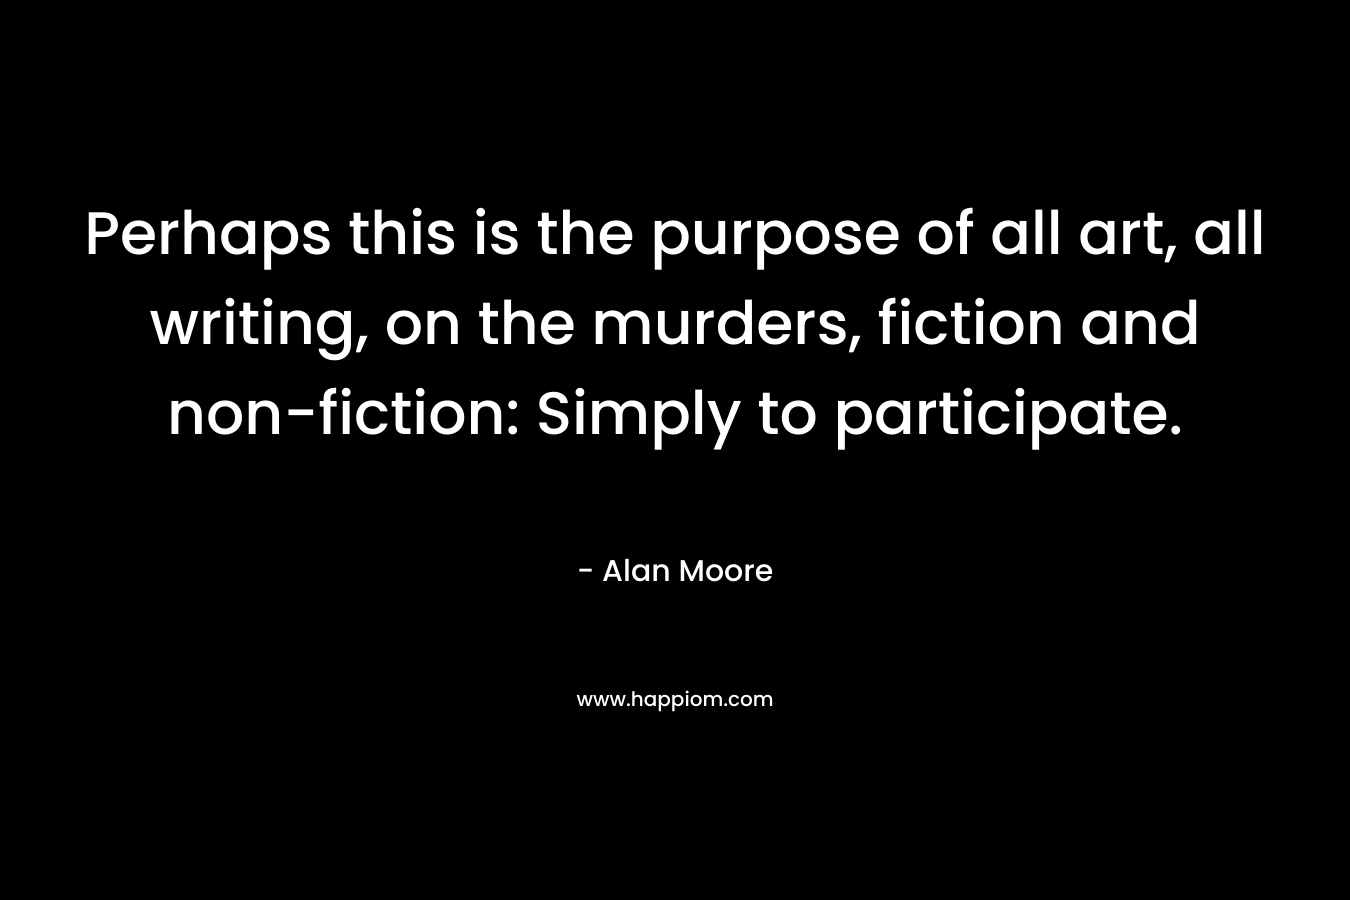 Perhaps this is the purpose of all art, all writing, on the murders, fiction and non-fiction: Simply to participate. – Alan Moore